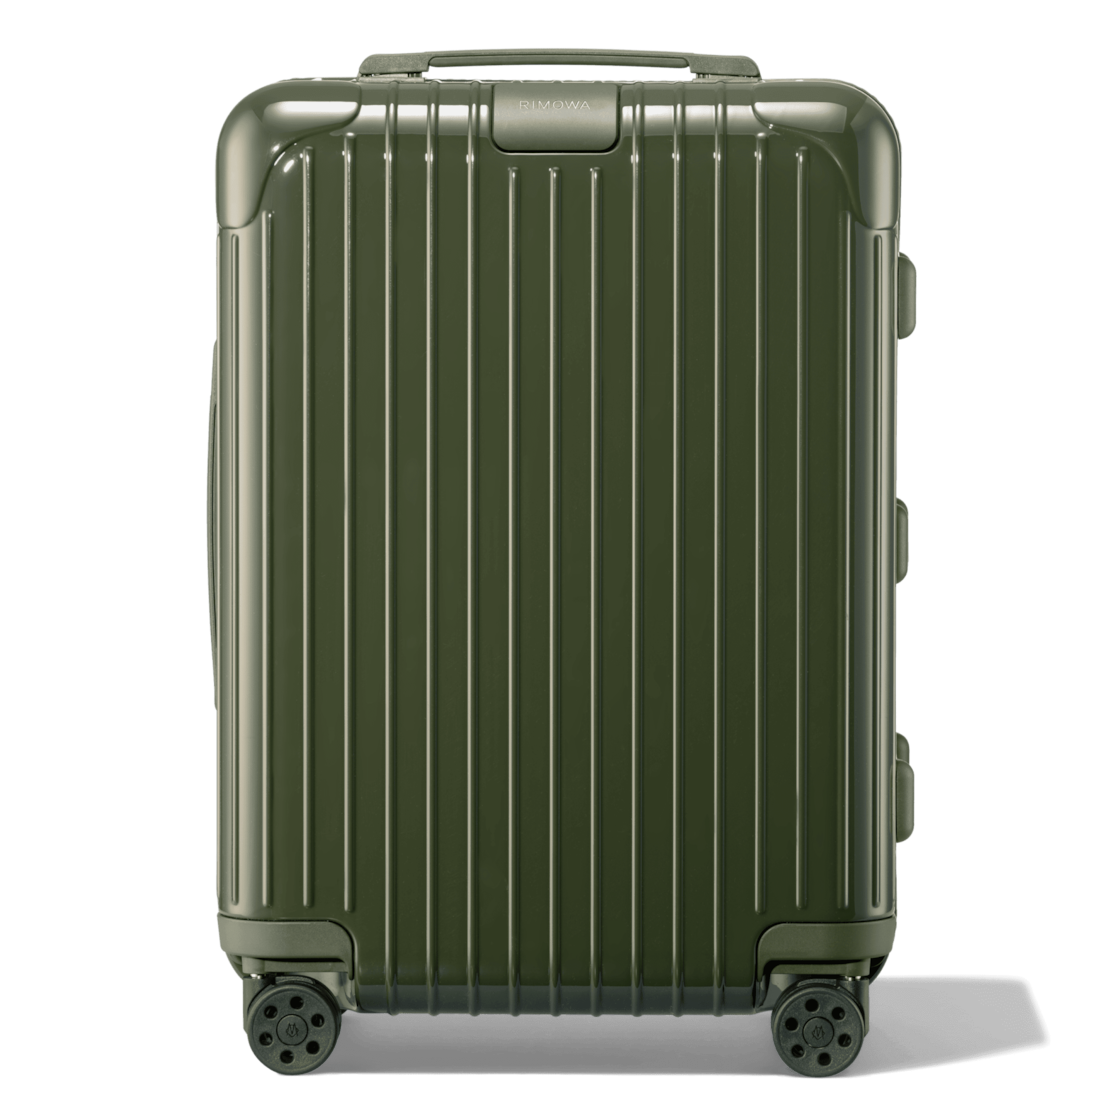 Lightweight carry on or checked luggage 